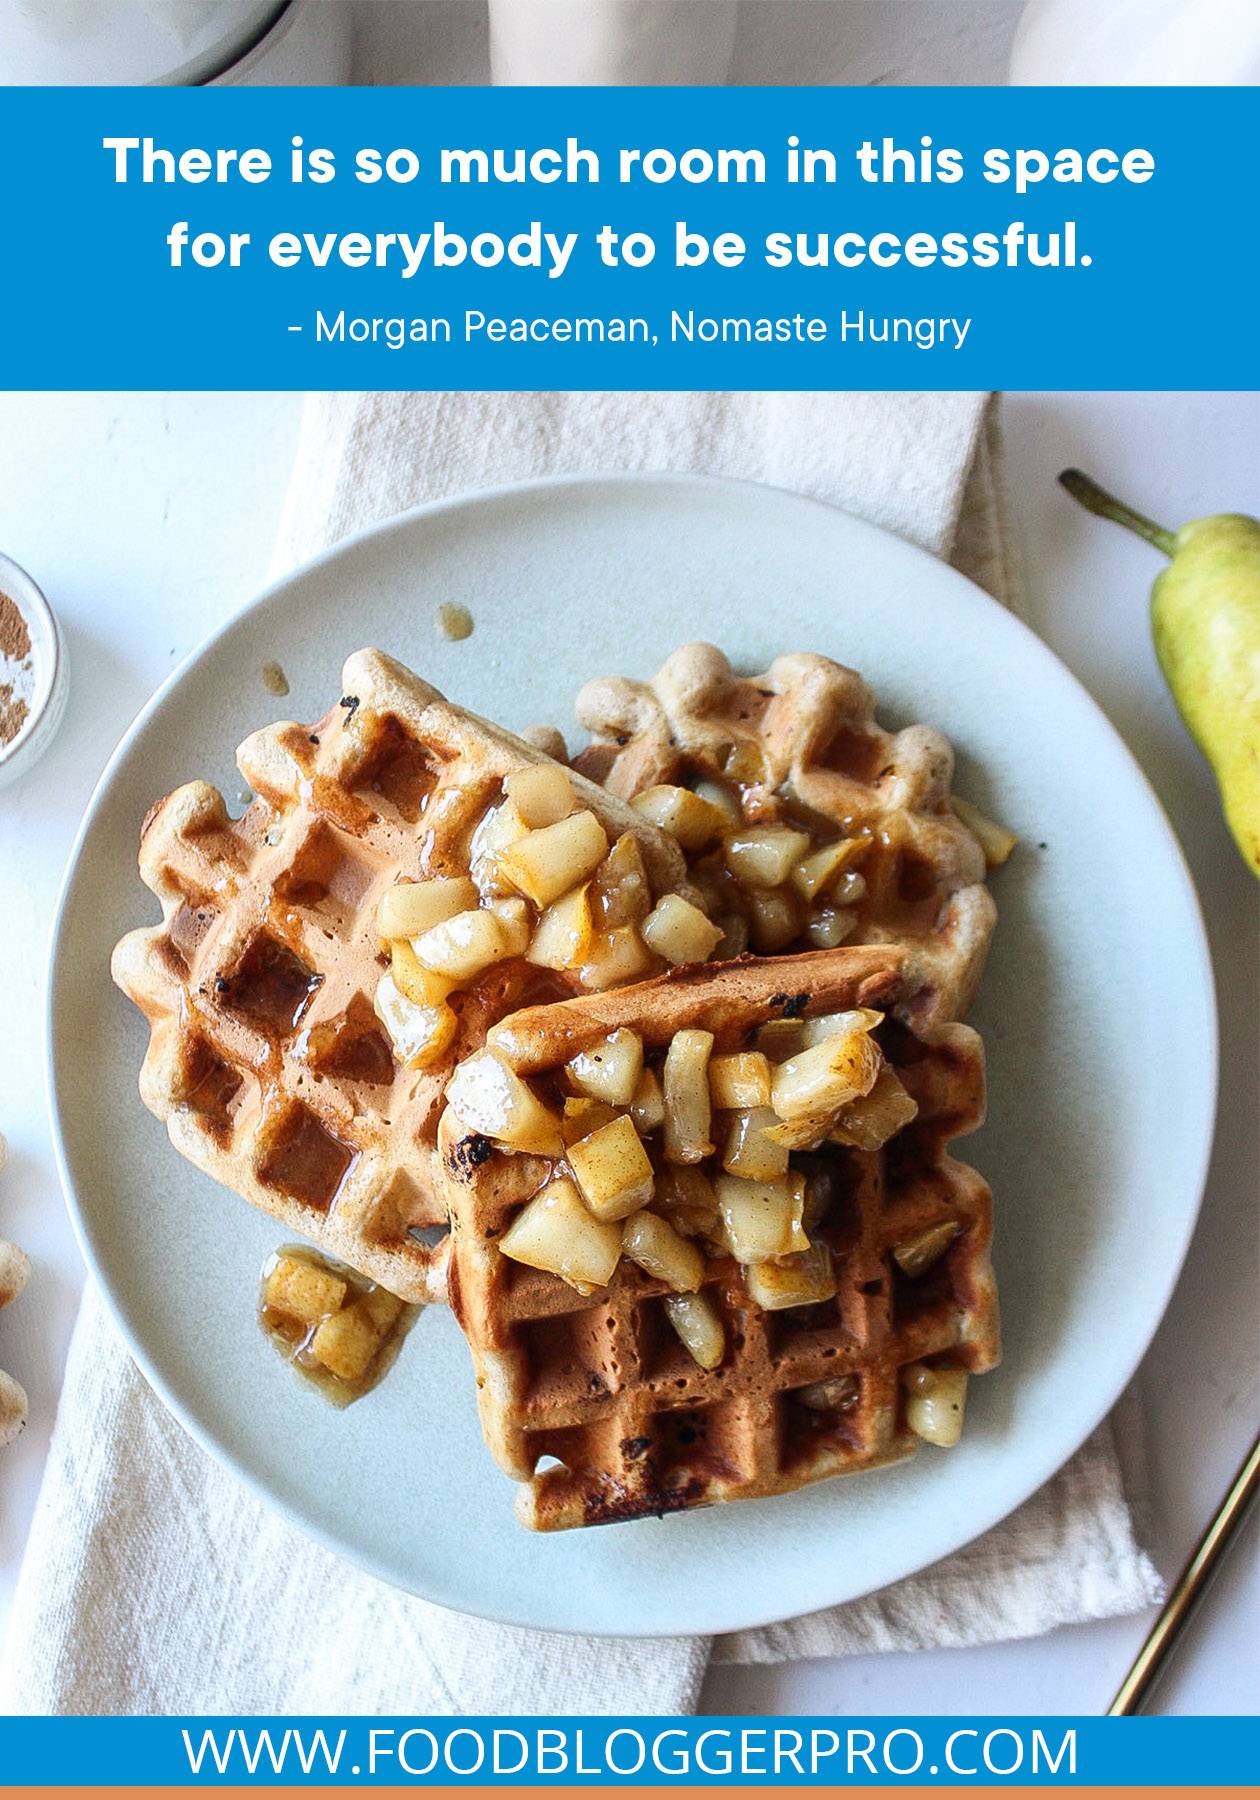 A photograph of pear waffles with a quote from Morgan Peaceman's episode of The Food Blogger Pro Podcast, "There is so much room in this space for everybody to be successful."